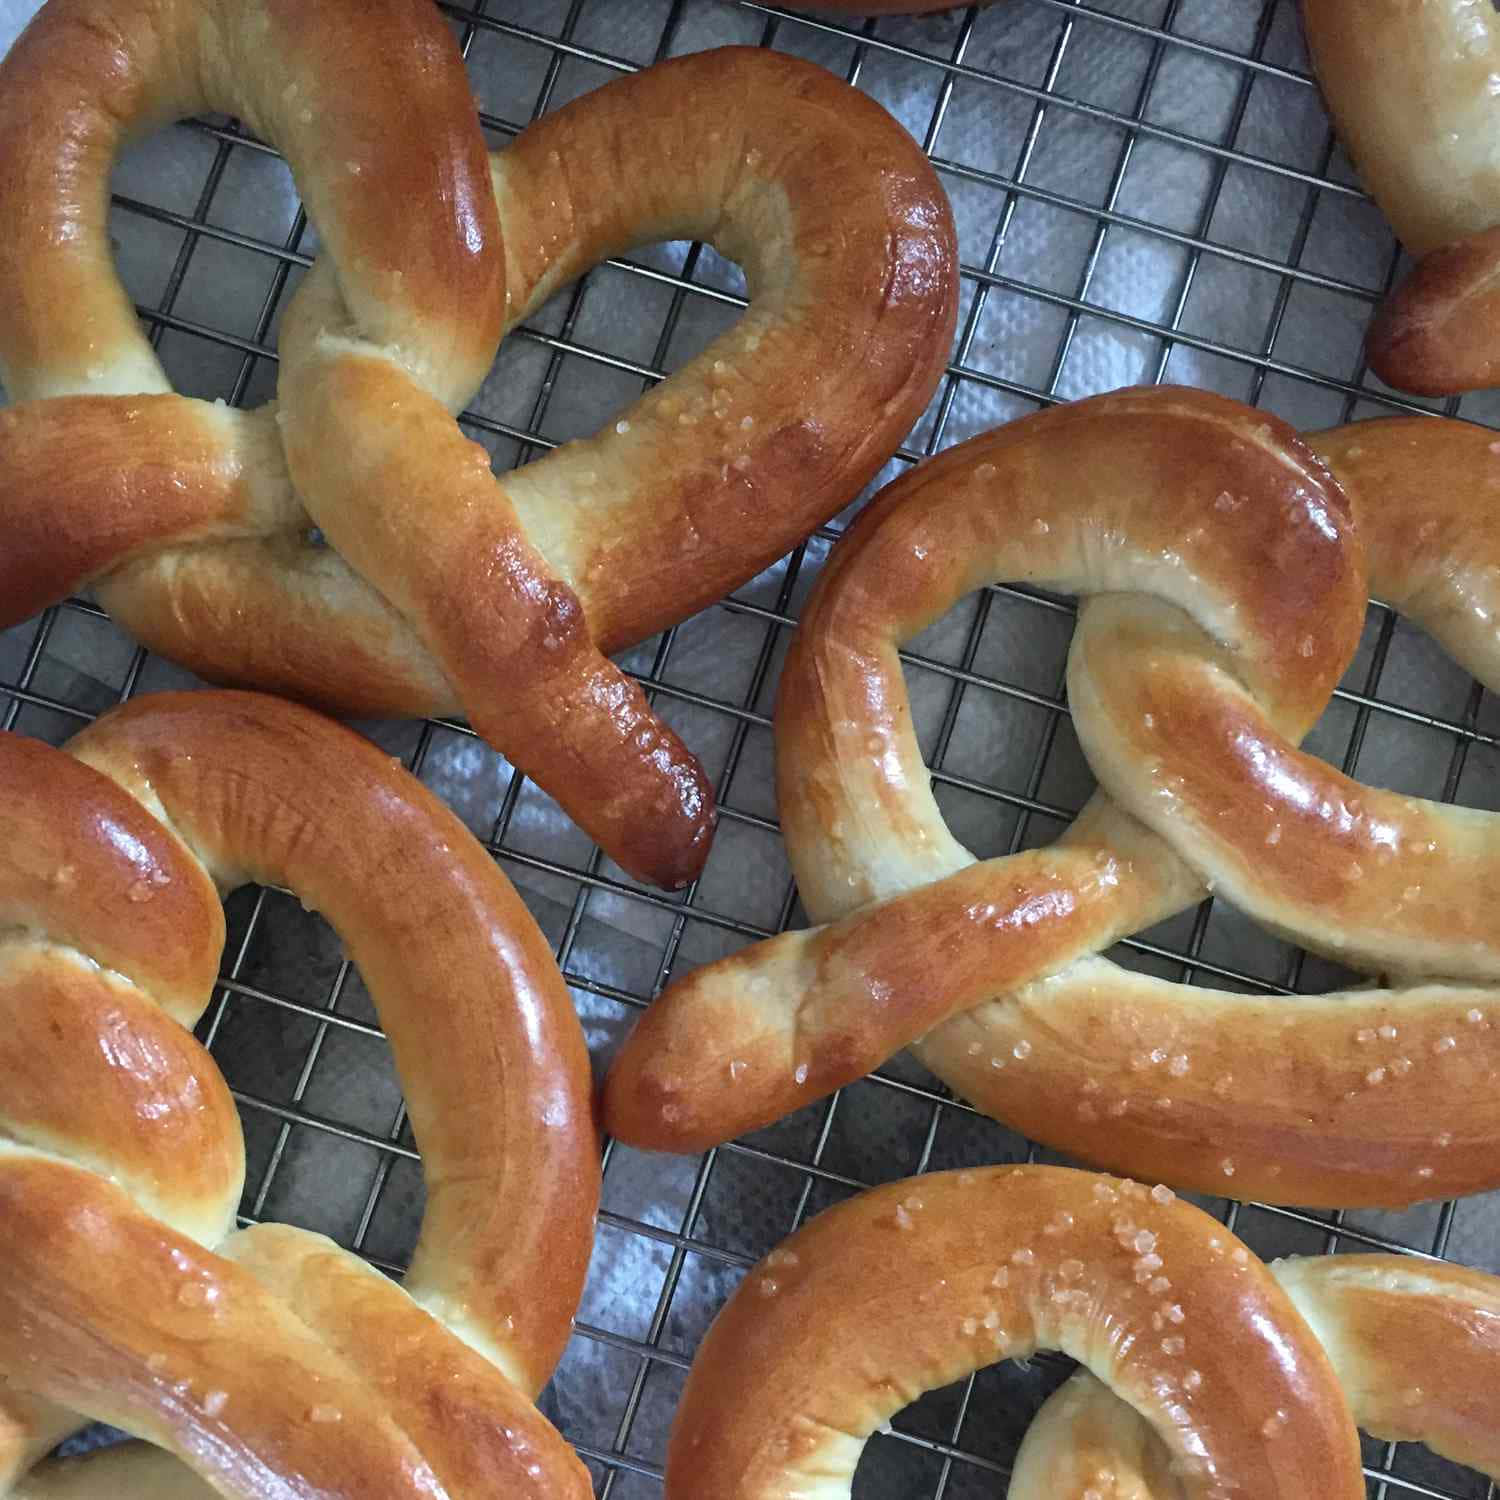 Fresh pretzels made daily with love